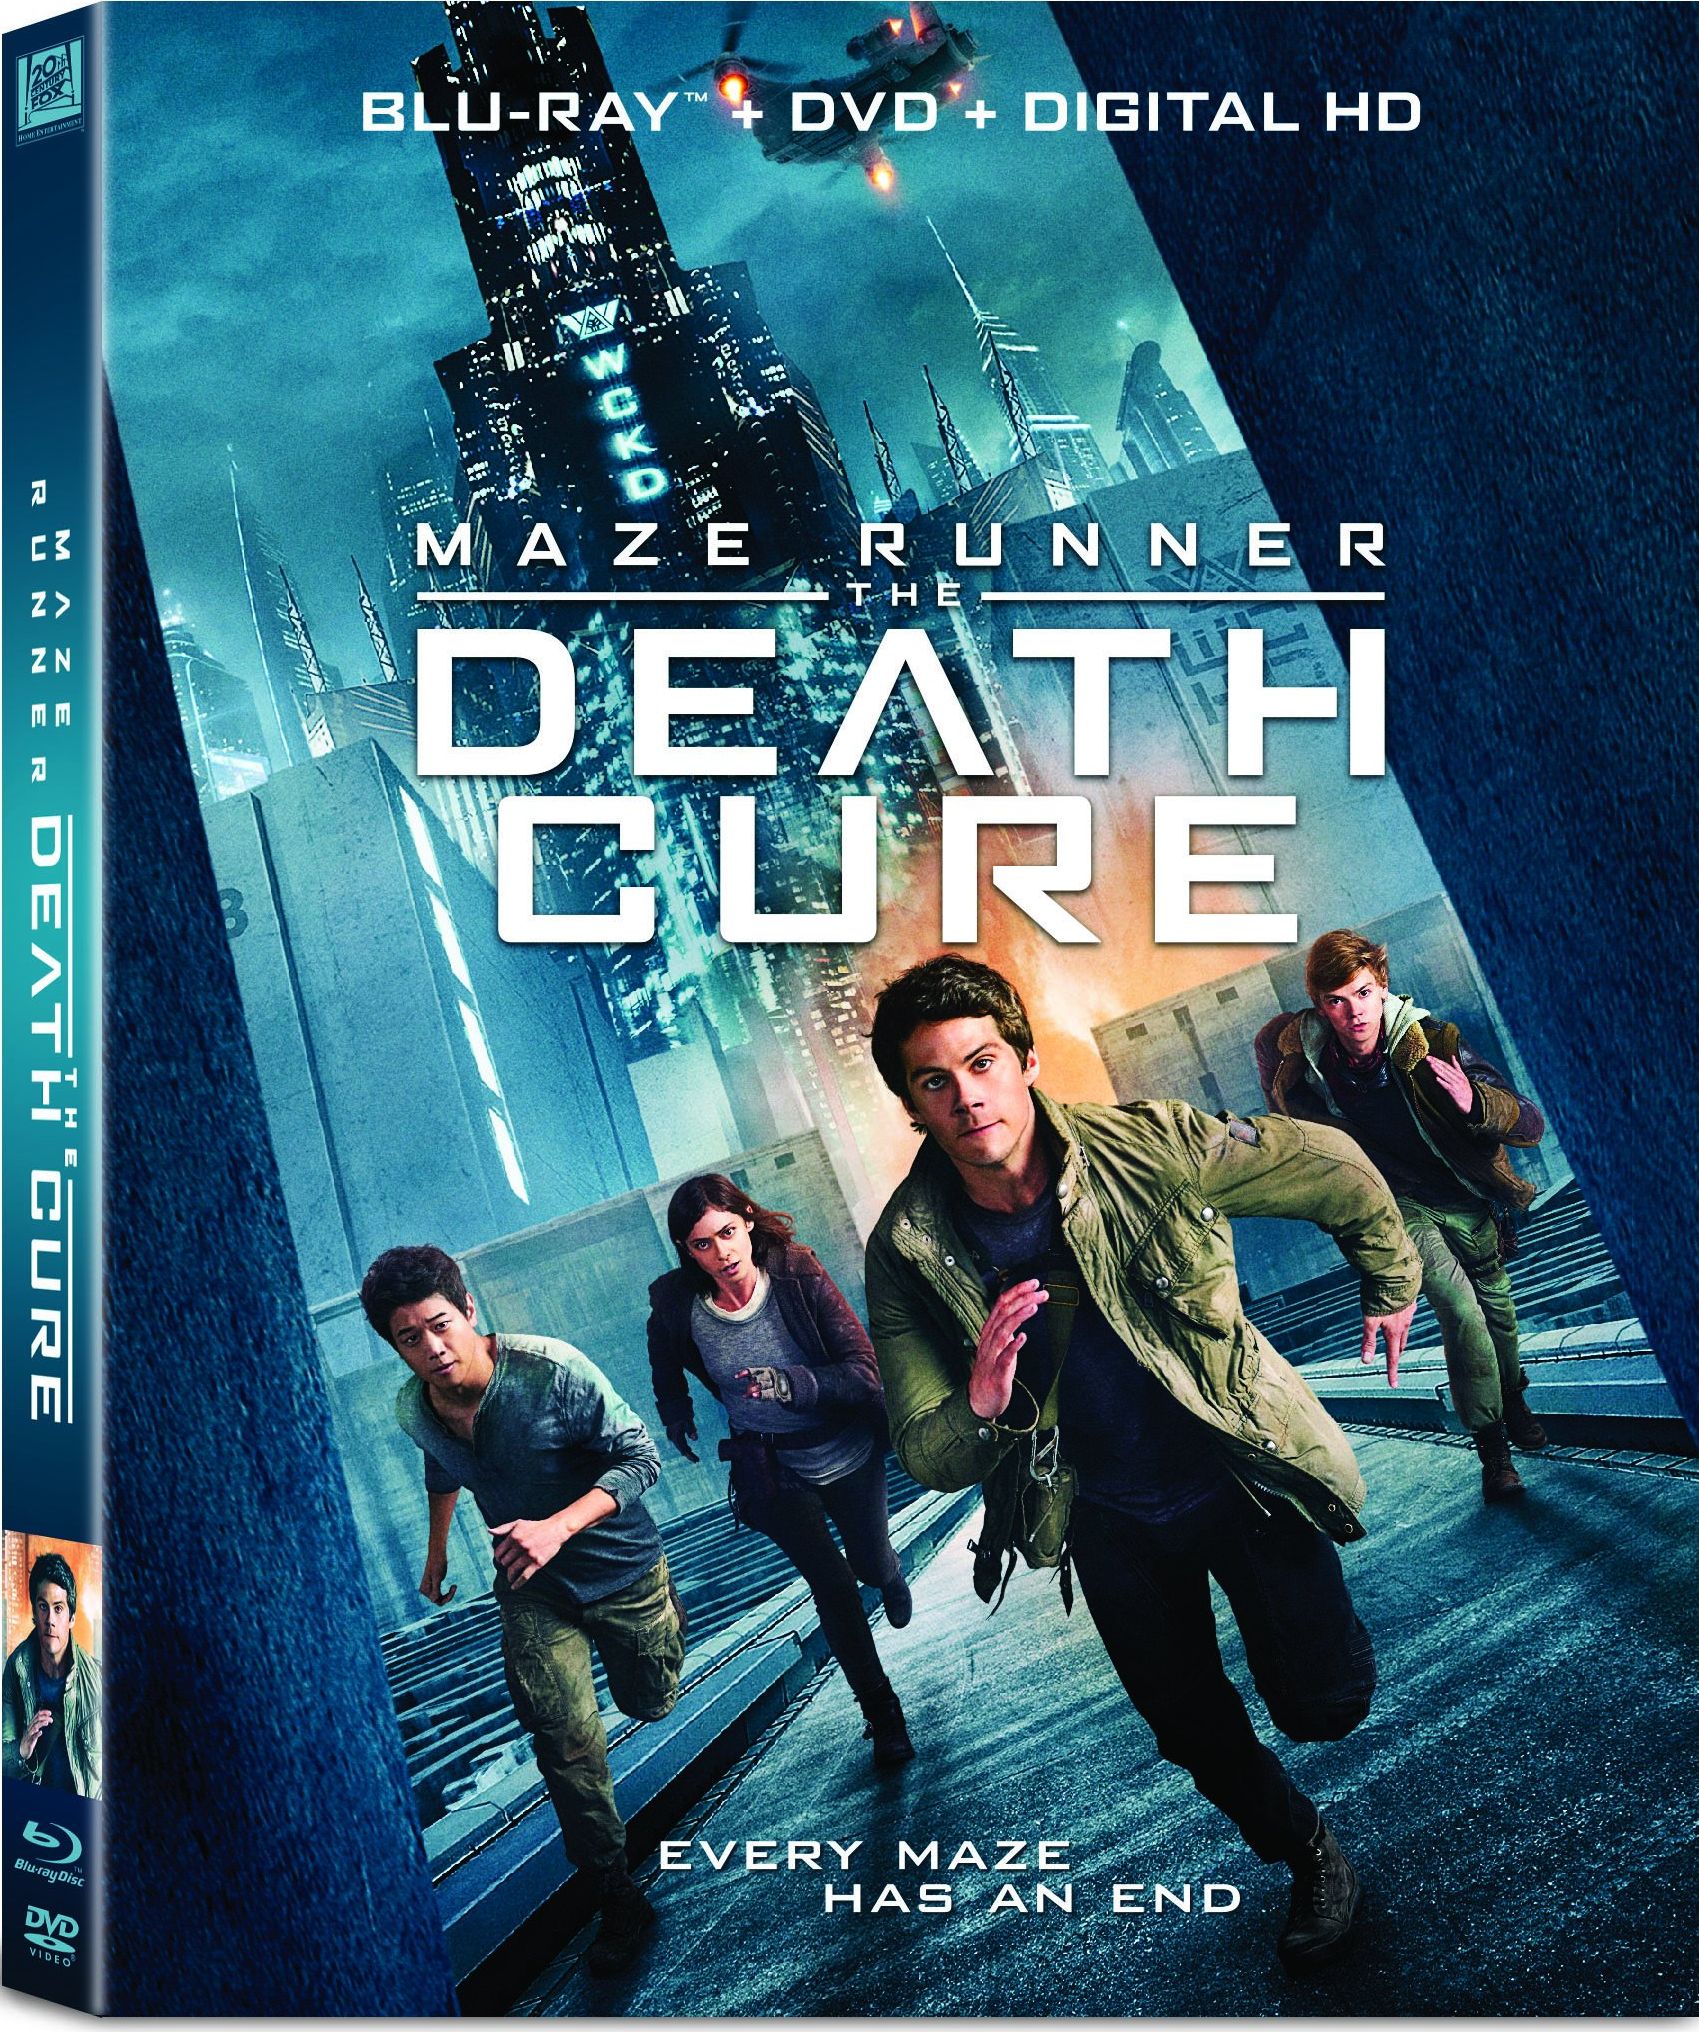 Maze Runner: The Death Cure DVD Release Date April 24, 2018